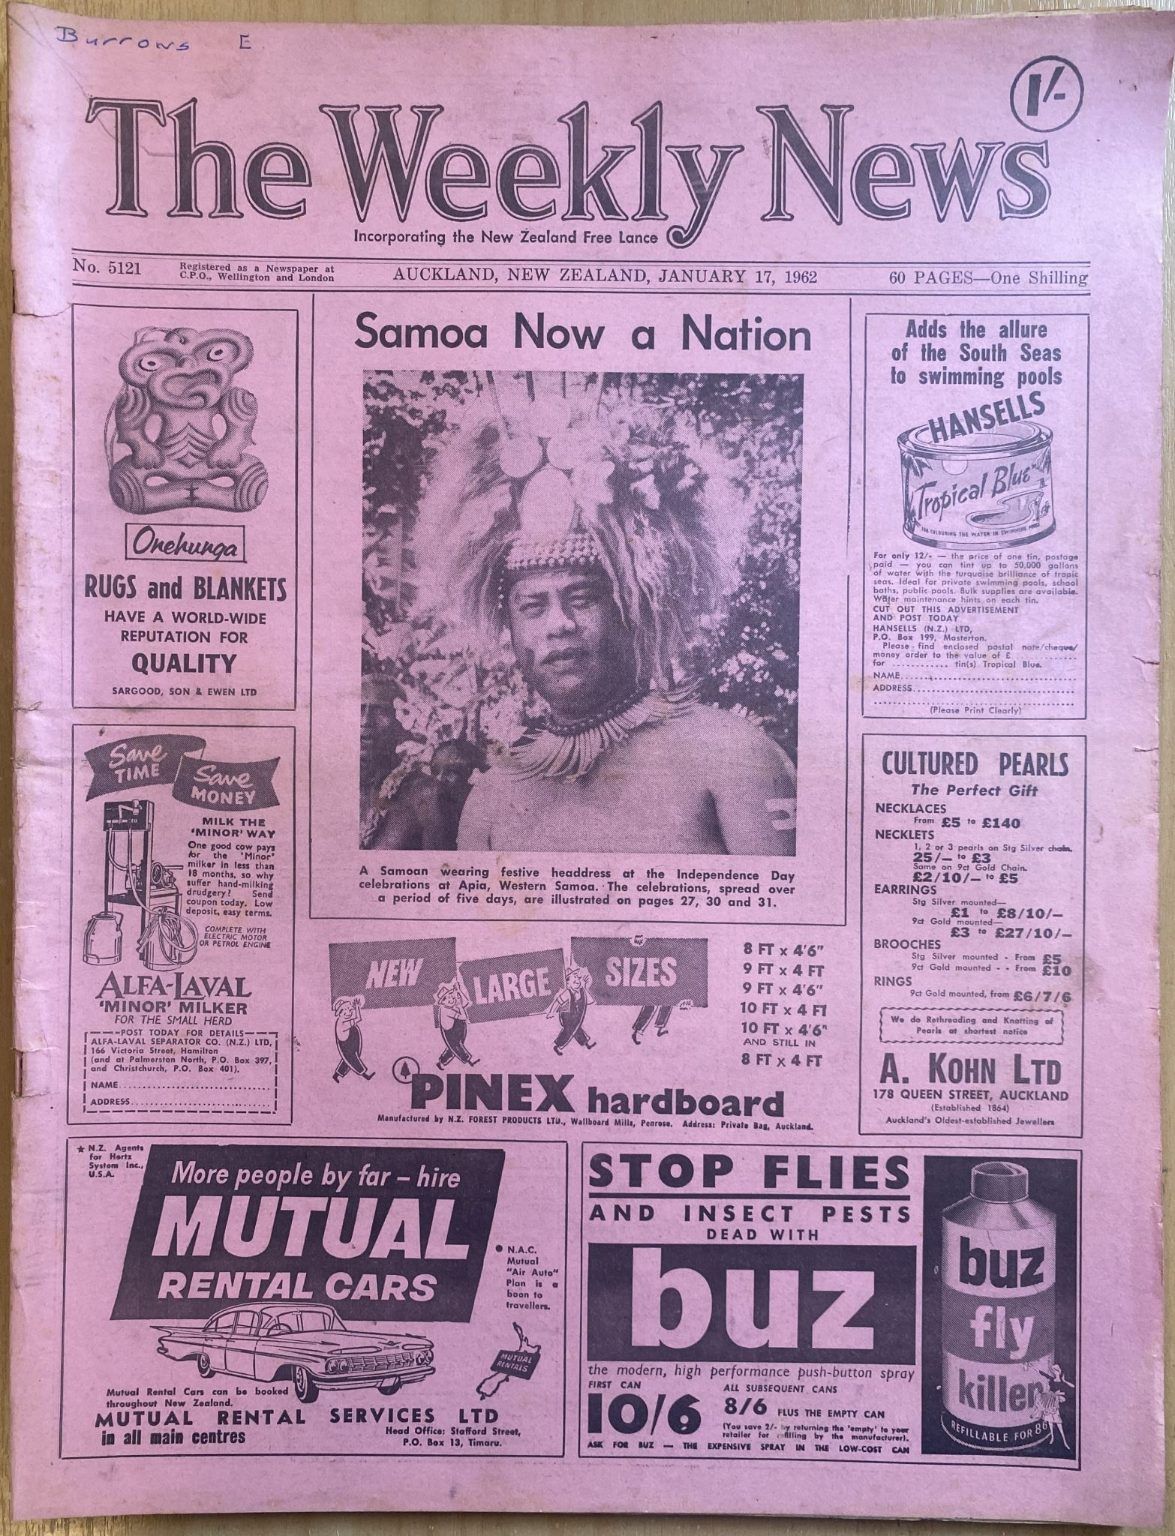 OLD NEWSPAPER: The Weekly News, No. 5121, 17 January 1962